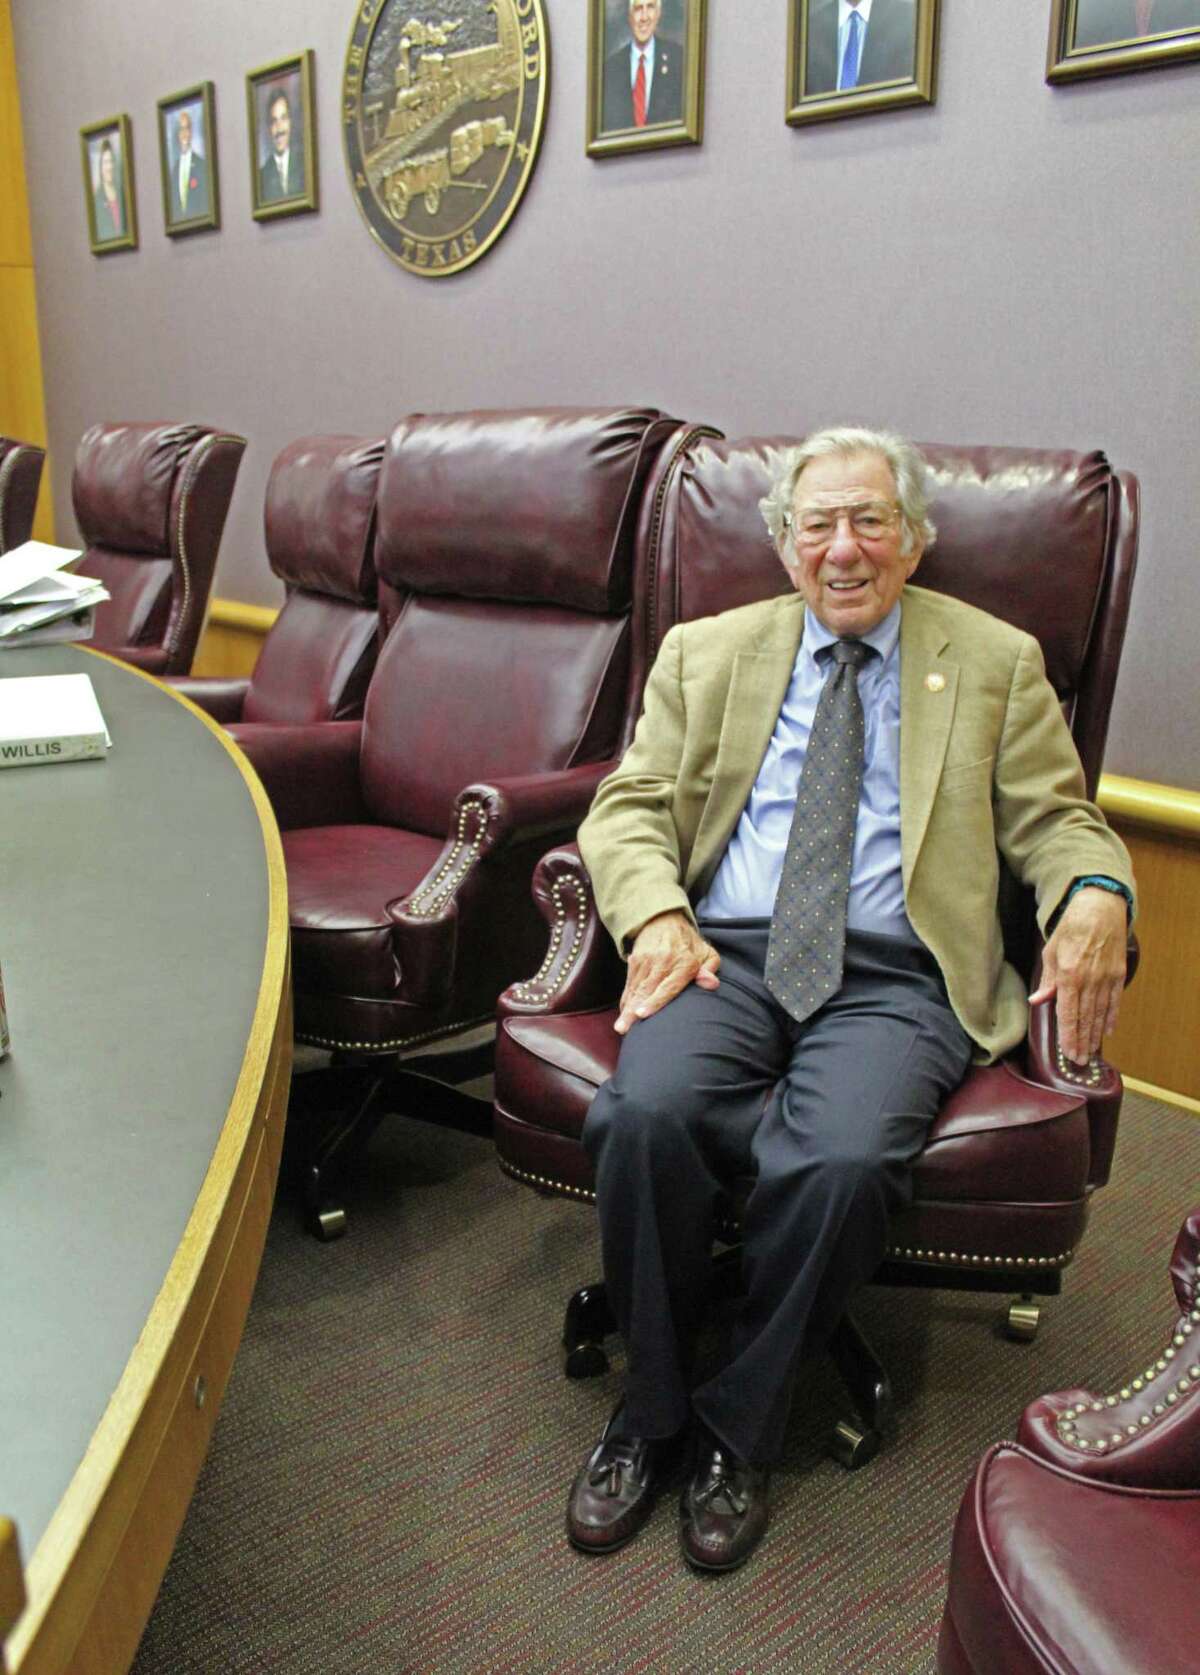 Mayor Leonard Scarcella at Stafford City Hall in October 2019. Scarcella, who served as the city’s mayor from 1969 until his death in 2020, will be replaced by one of four candidates when votes are cast and counted in the general election.